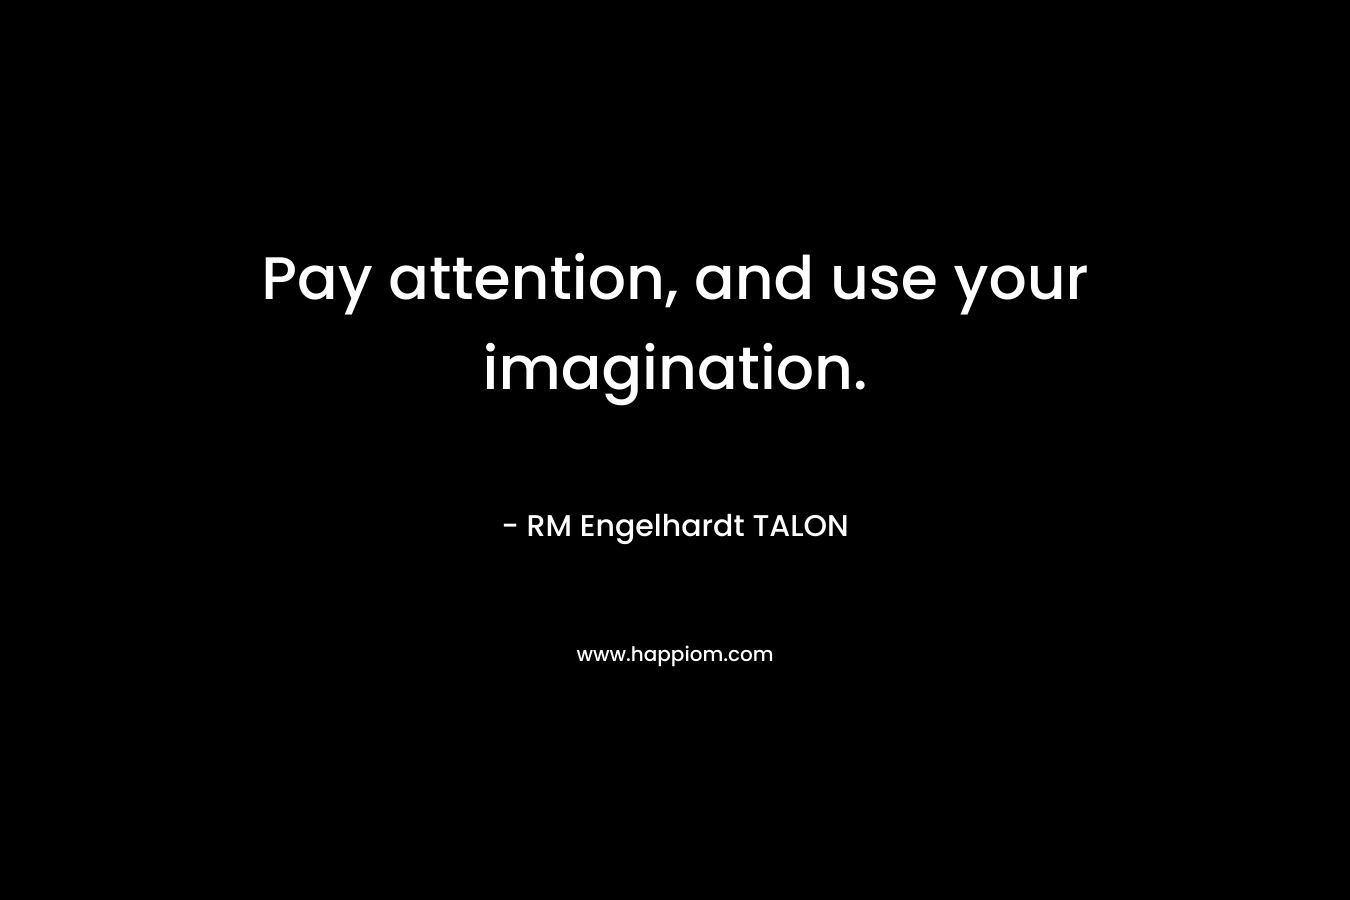 Pay attention, and use your imagination. – RM Engelhardt TALON